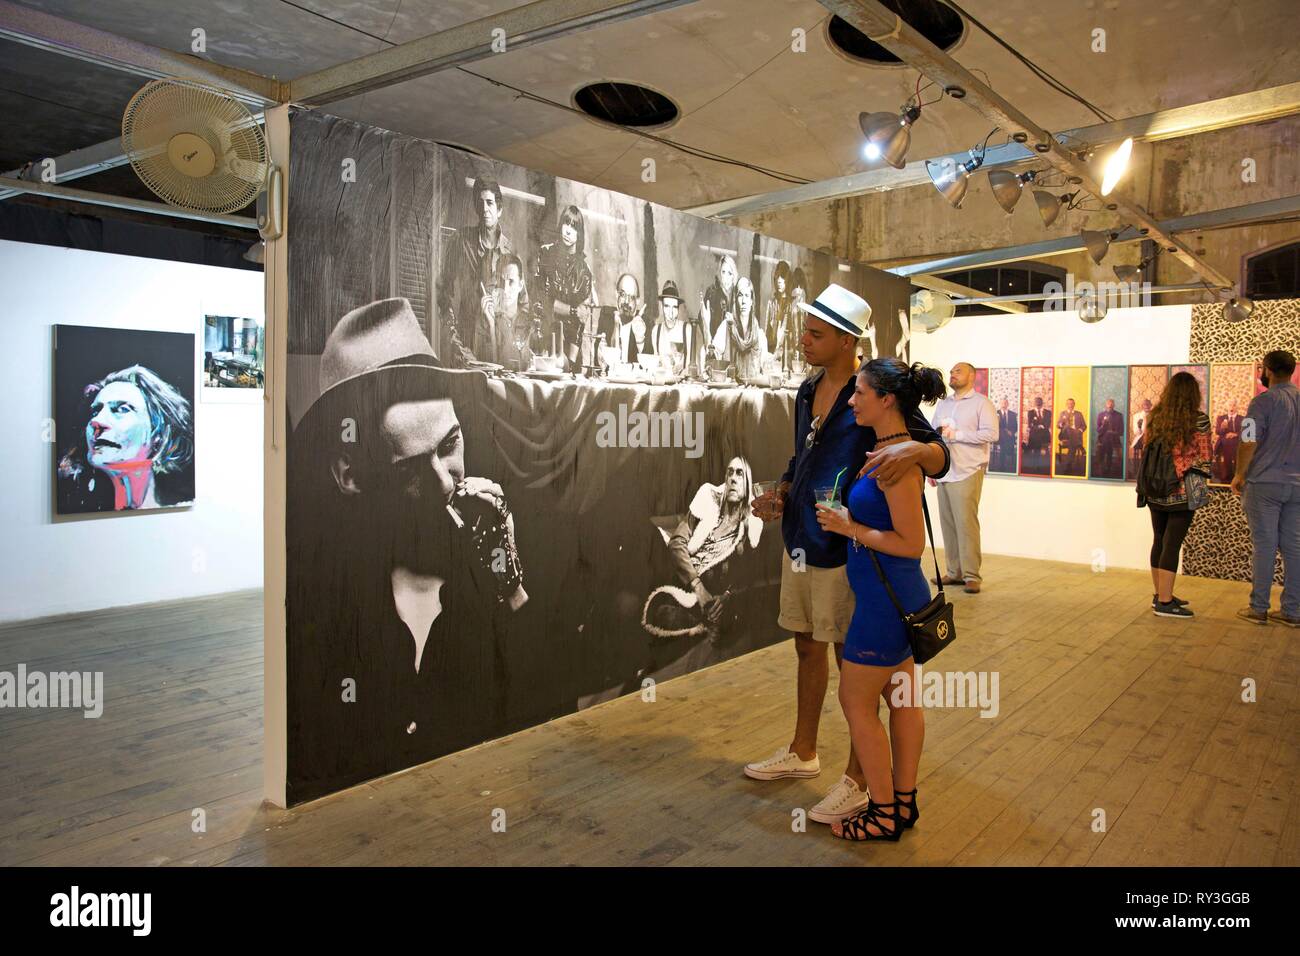 Cuba, La Havana, Vedado, young couple in front of a contemporary work of Maurice Renoma exposed in the industrial setting of the multicultural center La Fabrica de arte cubano Stock Photo